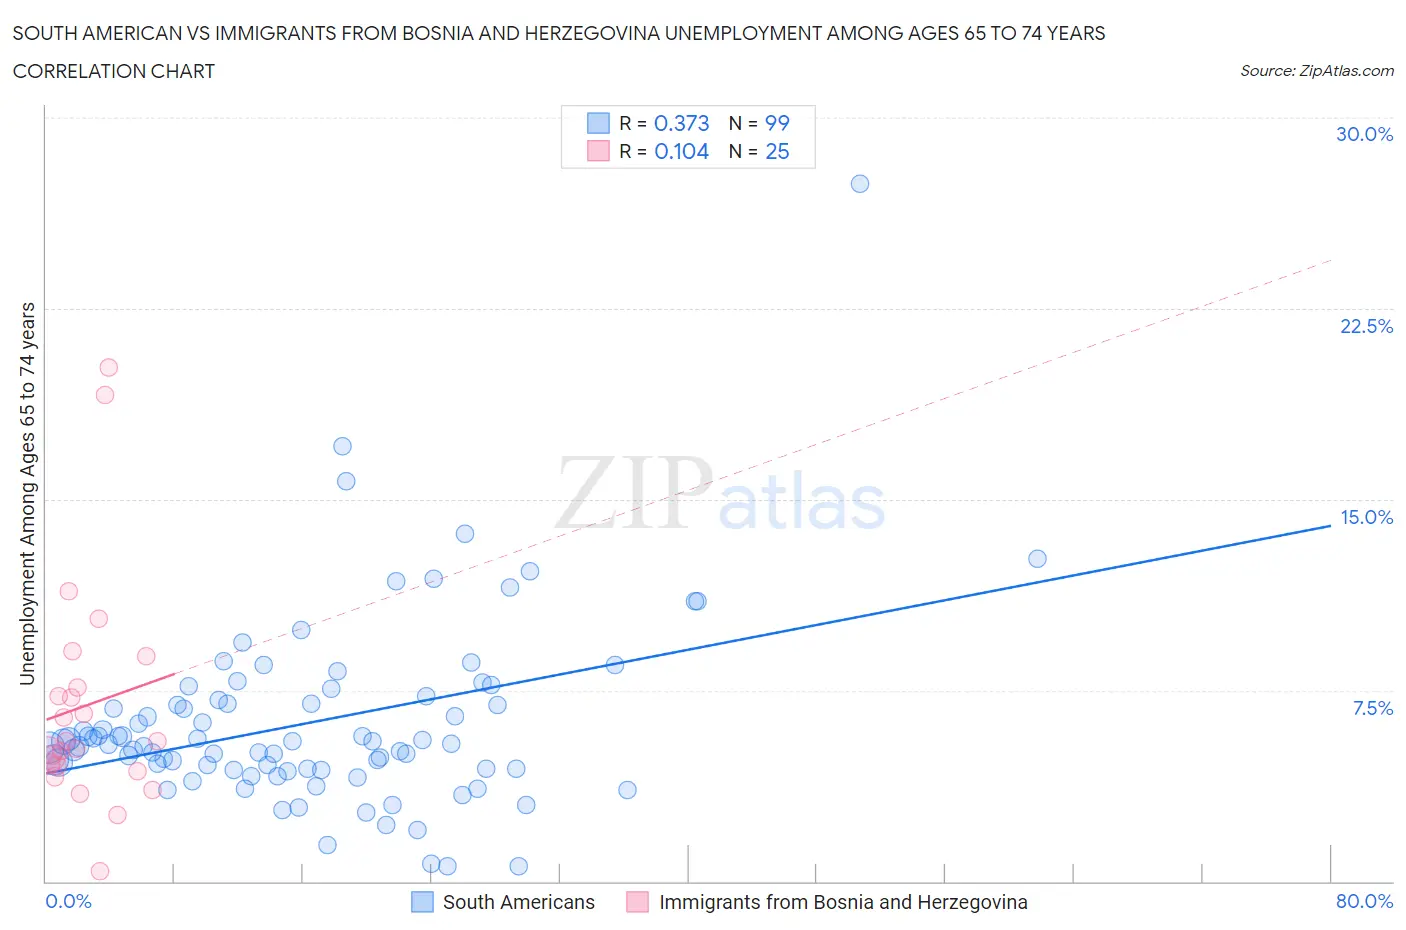 South American vs Immigrants from Bosnia and Herzegovina Unemployment Among Ages 65 to 74 years